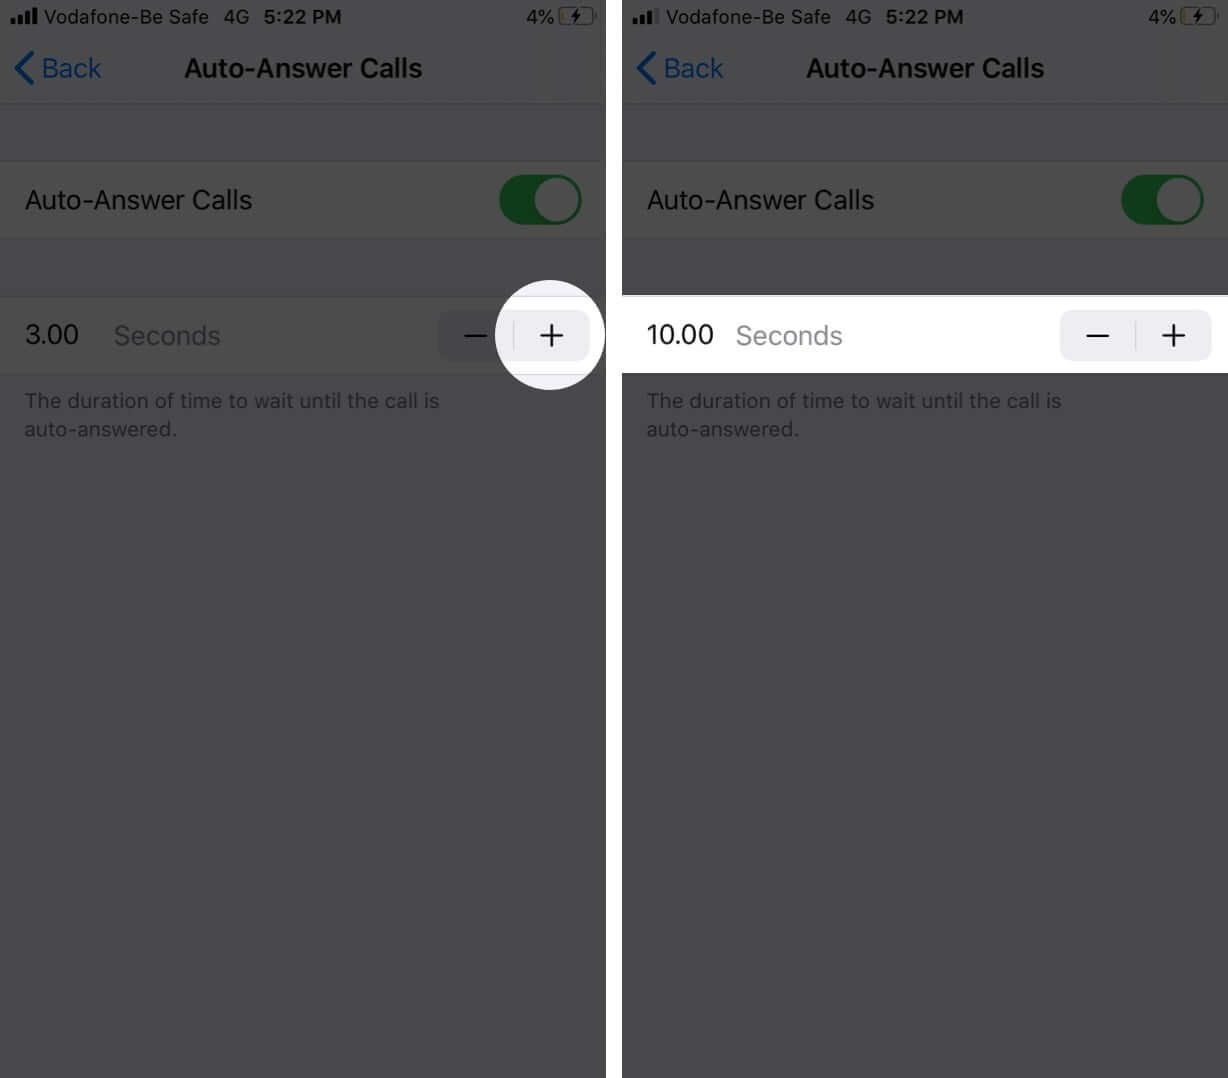 Tap on Plus to Increase Time Duration for Auto-Answer Calls on iPhone